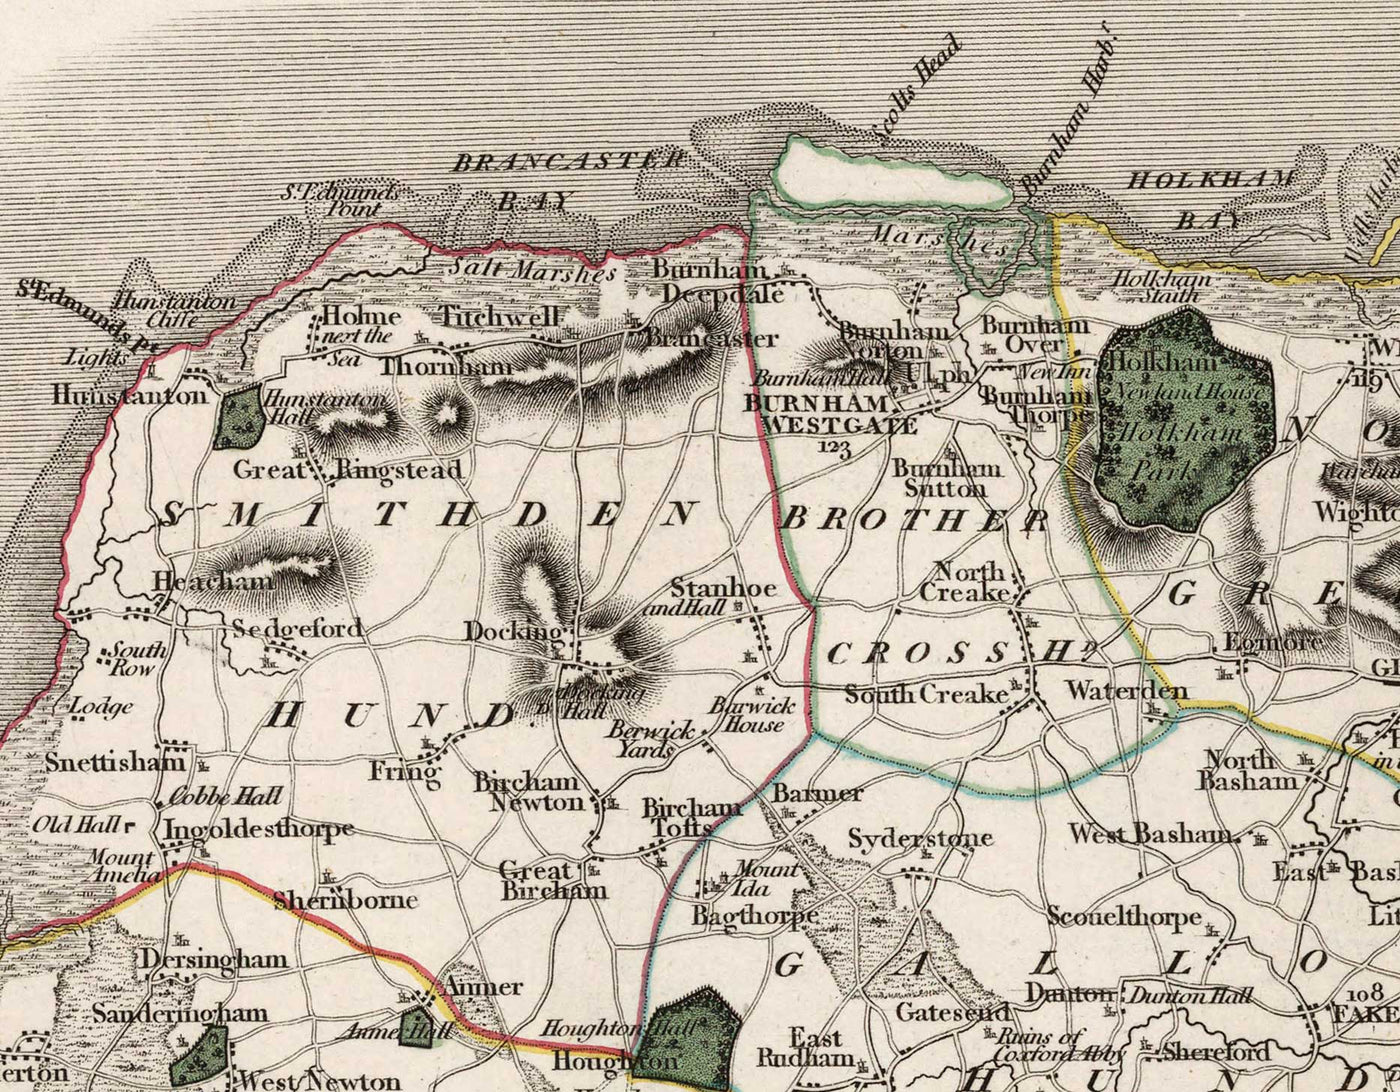 Old Map of Norfolk in 1807 by John Cary - Norwich, Cromer, Great Yarmouth, Thetford, King's Lynn